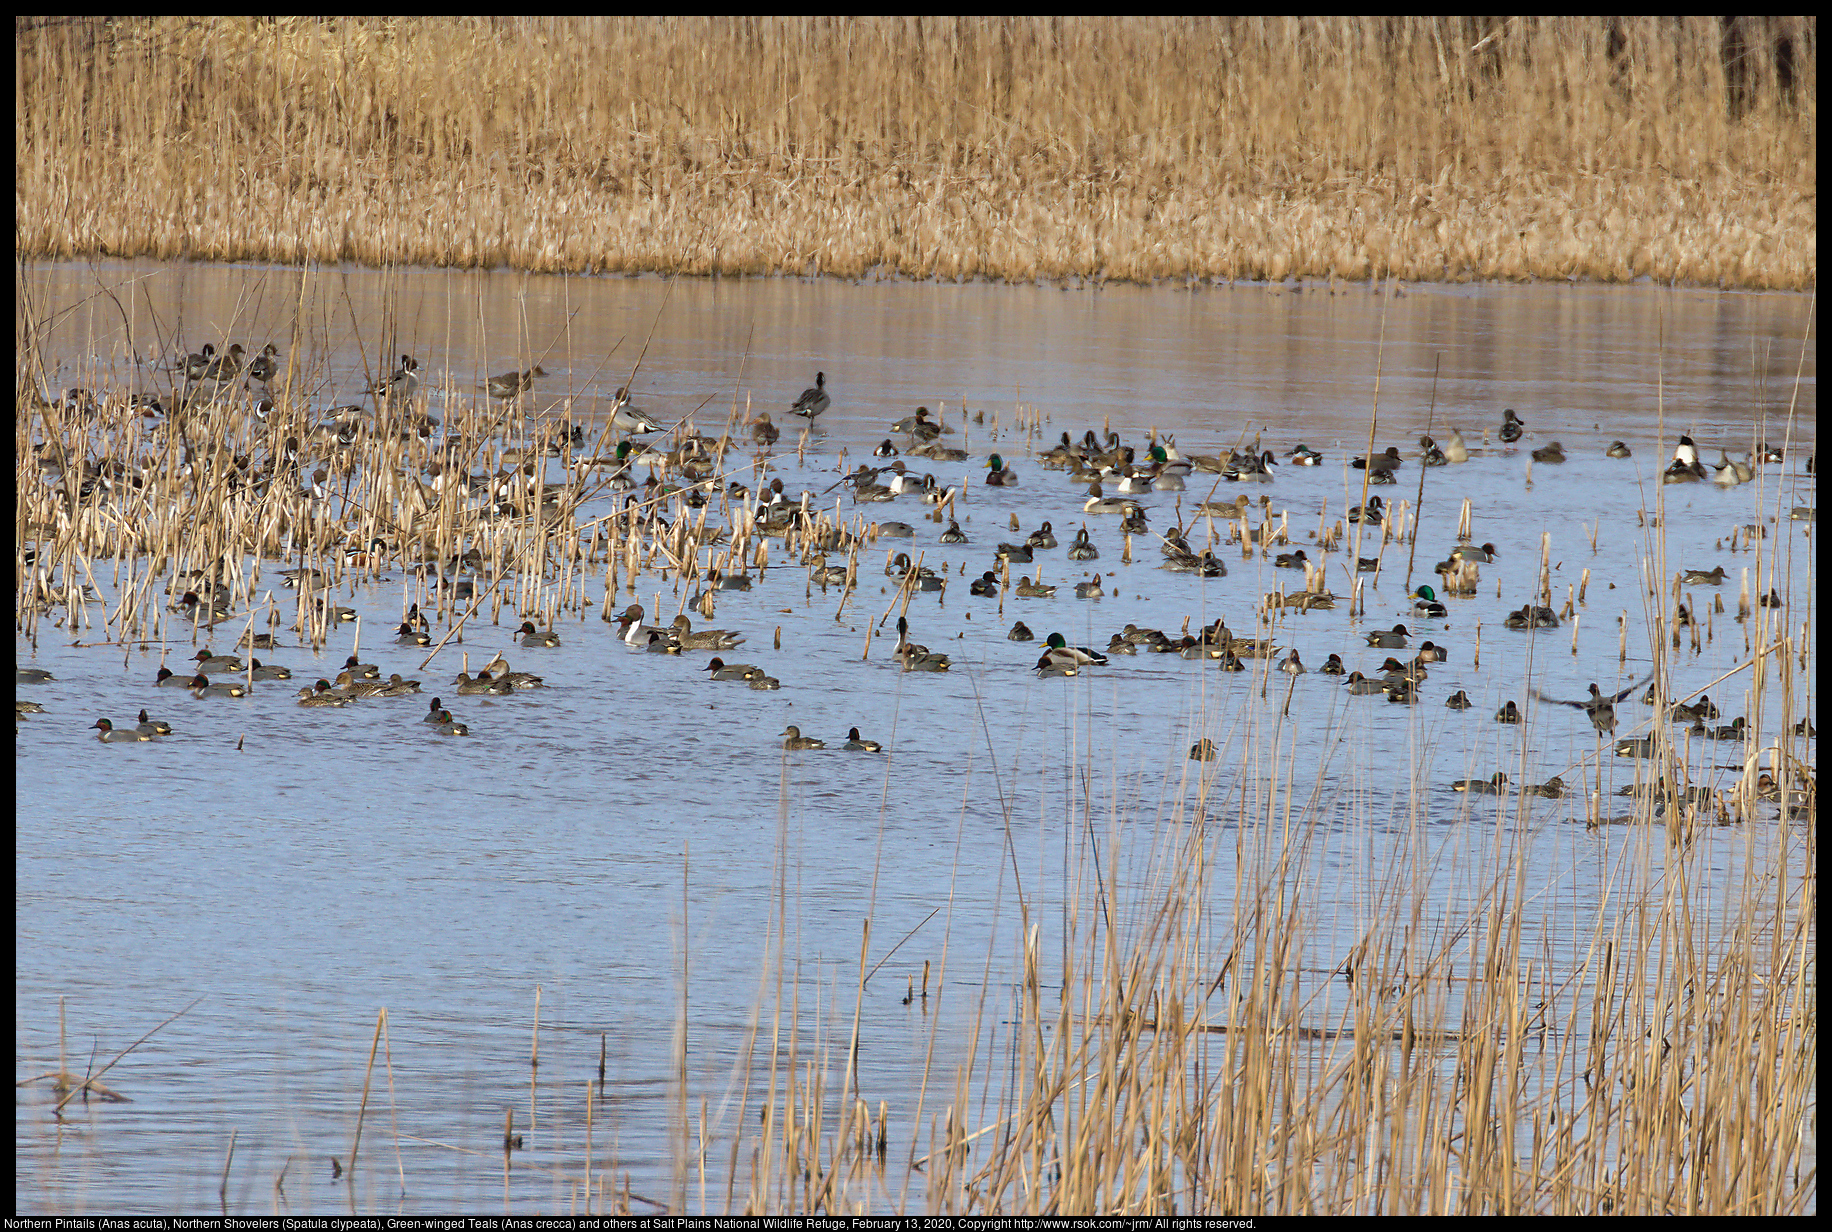 Northern Pintails (Anas acuta), Northern Shovelers (Spatula clypeata), Green-winged Teals (Anas crecca) and others at Salt Plains National Wildlife Refuge, February 13, 2020